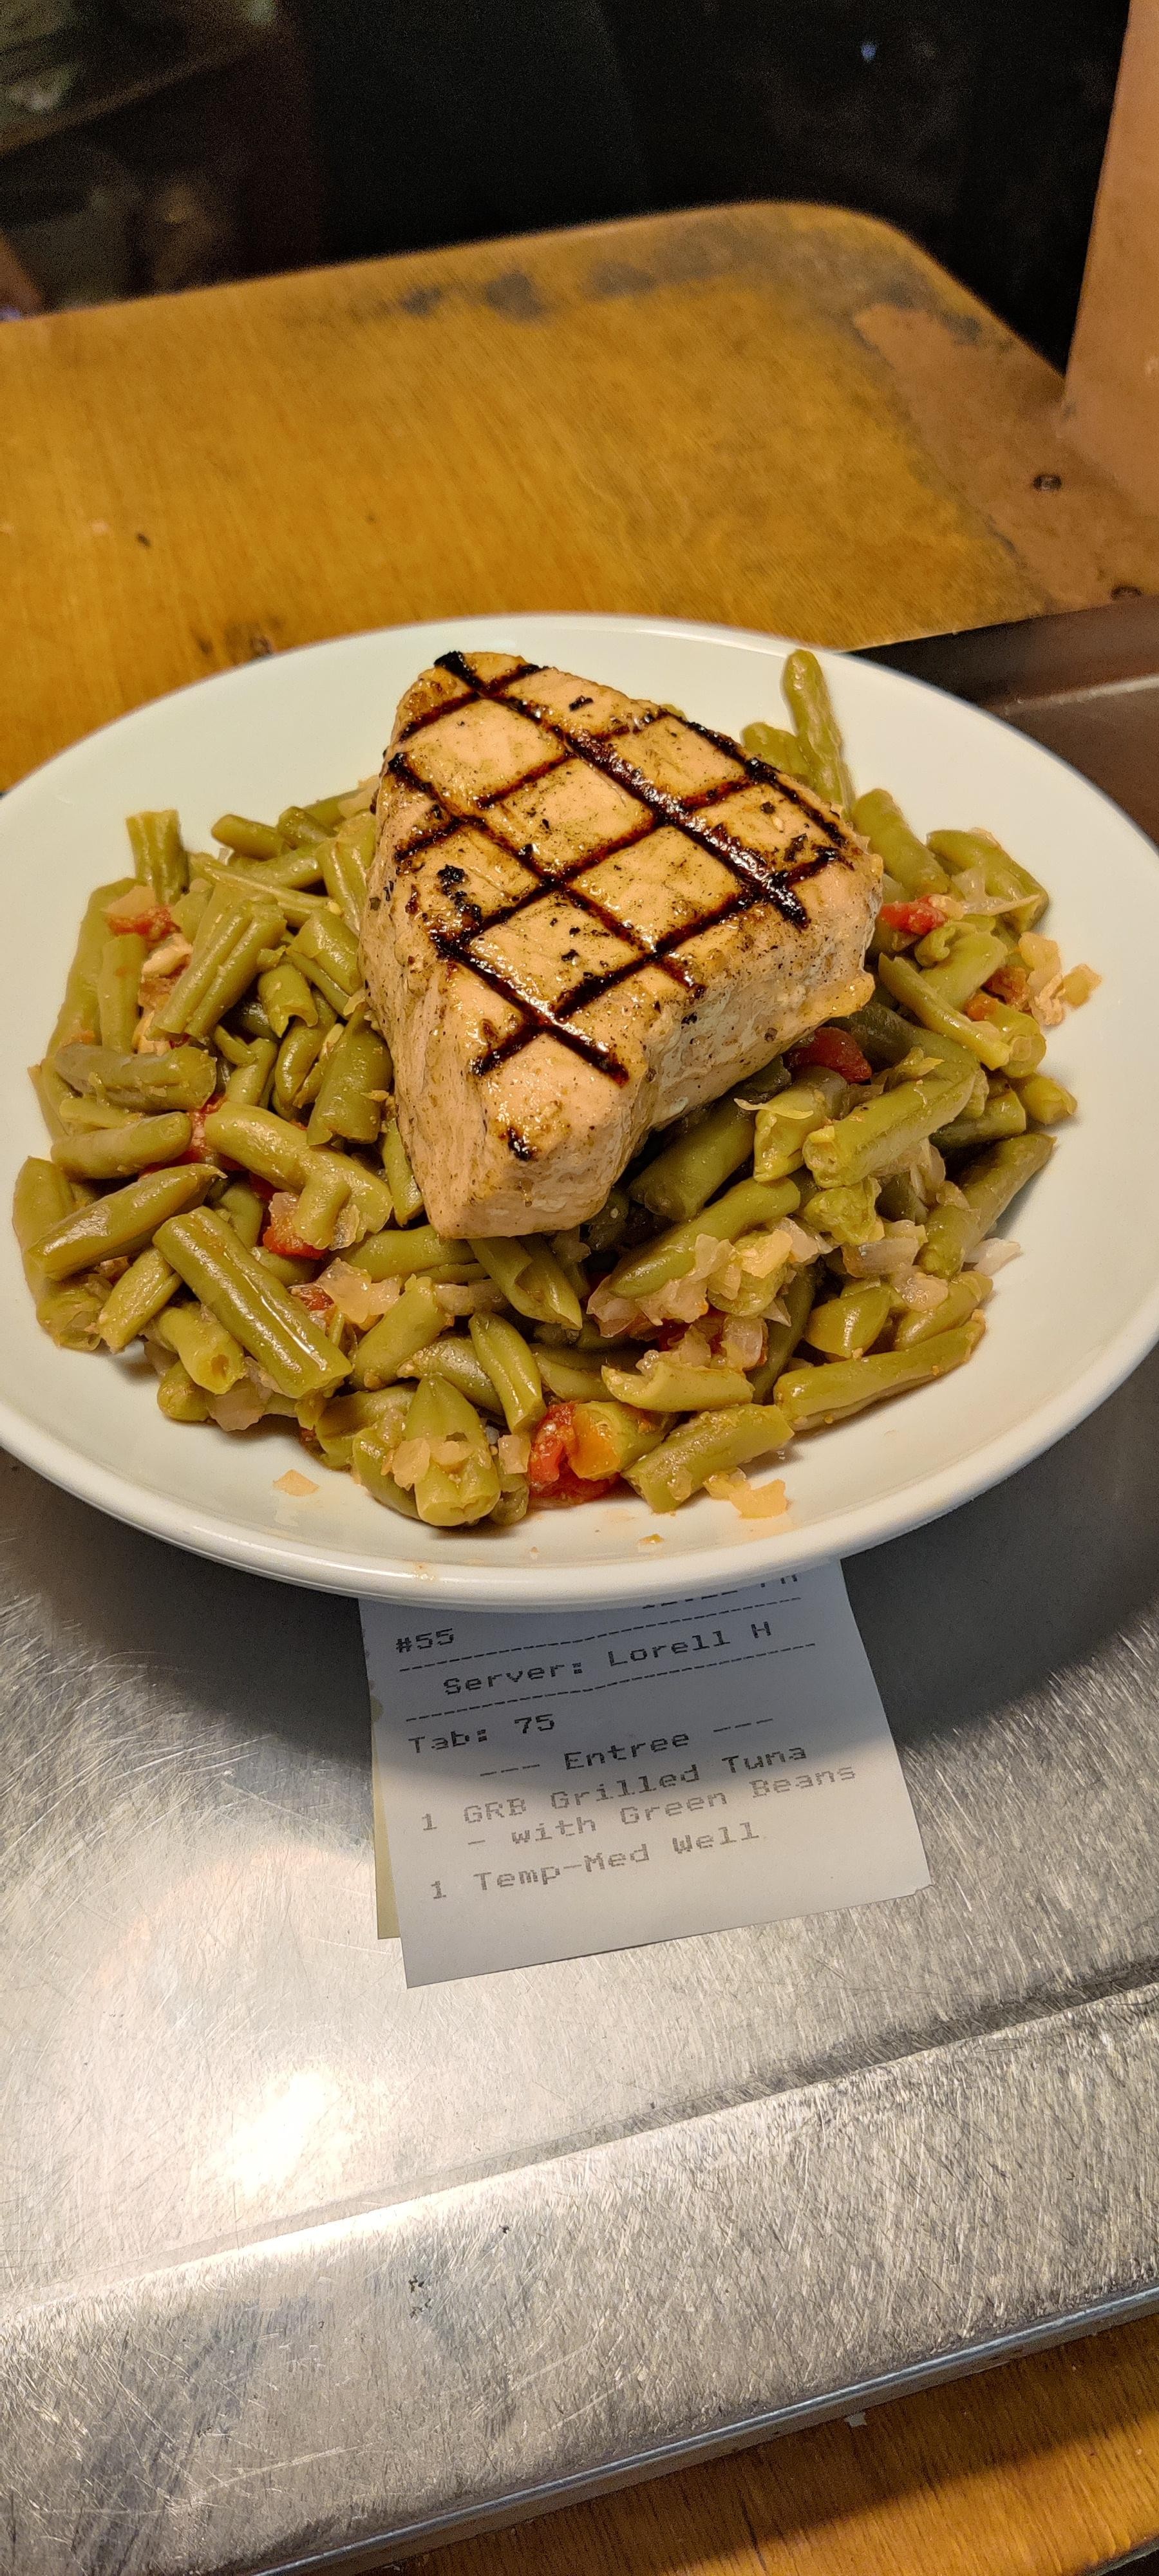 GRB Grilled Tuna - with Green Beans